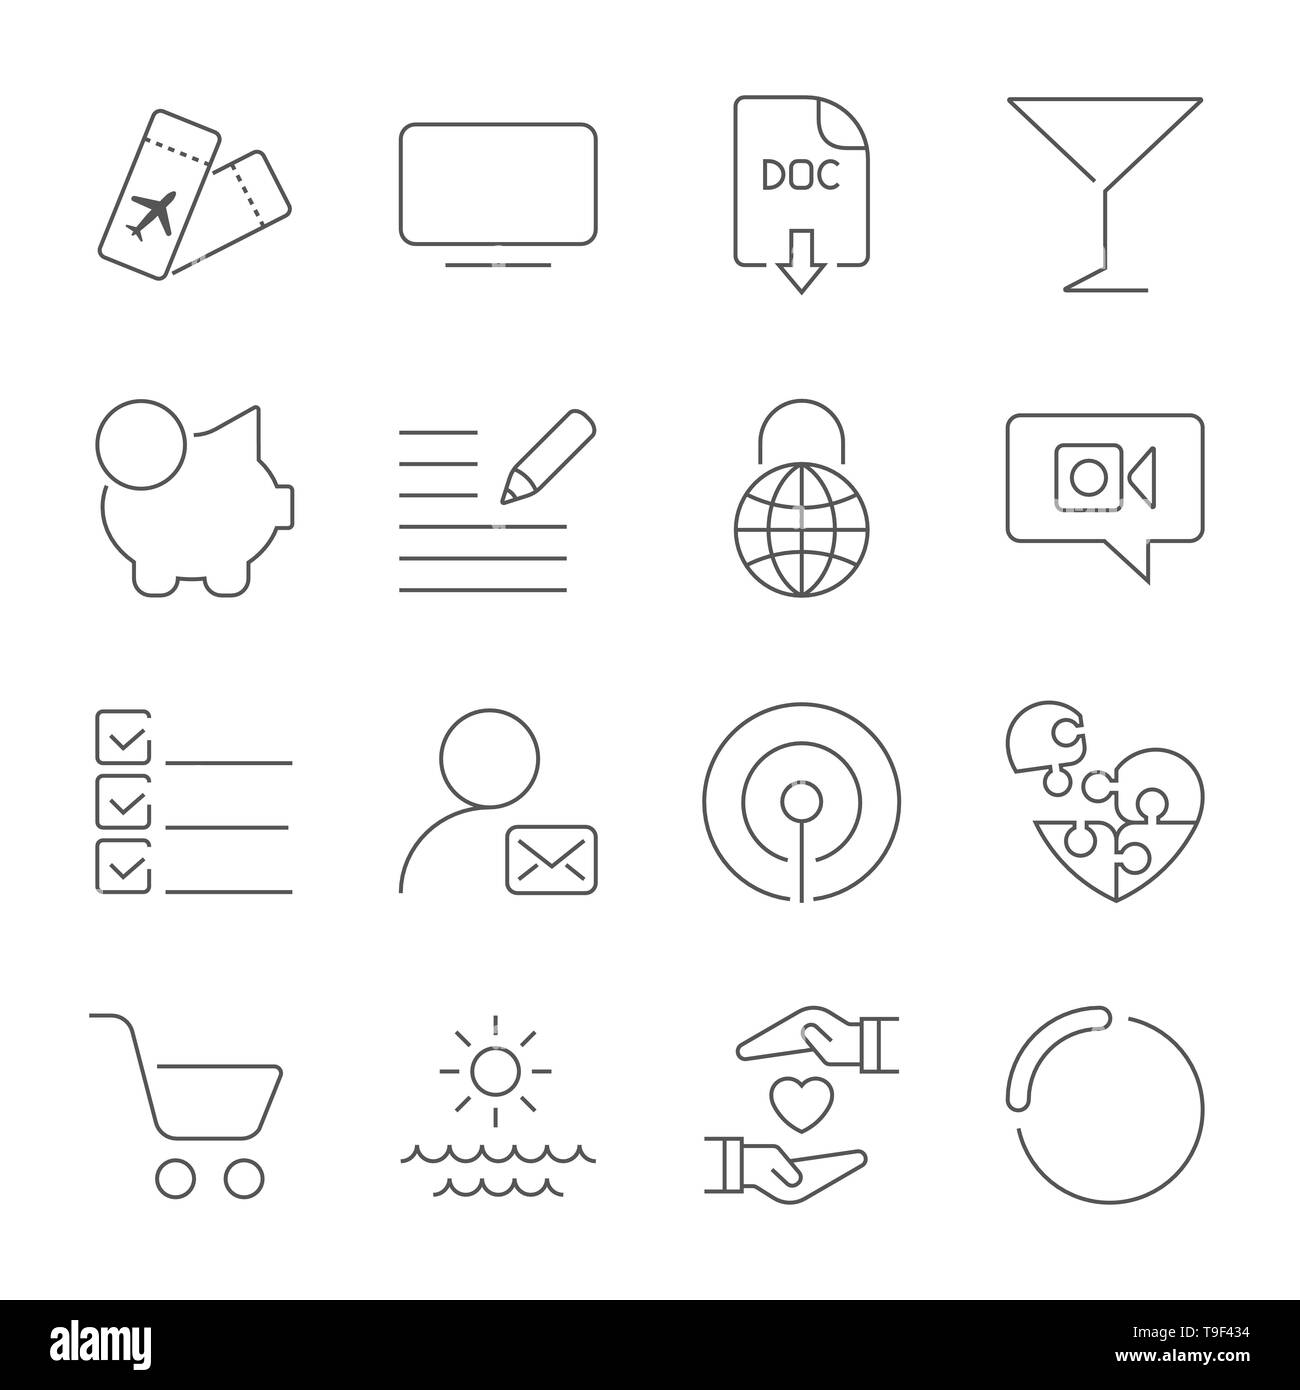 Simple different icons set. Universal icons to use for web and mobile. UI set of basic Stock Vector